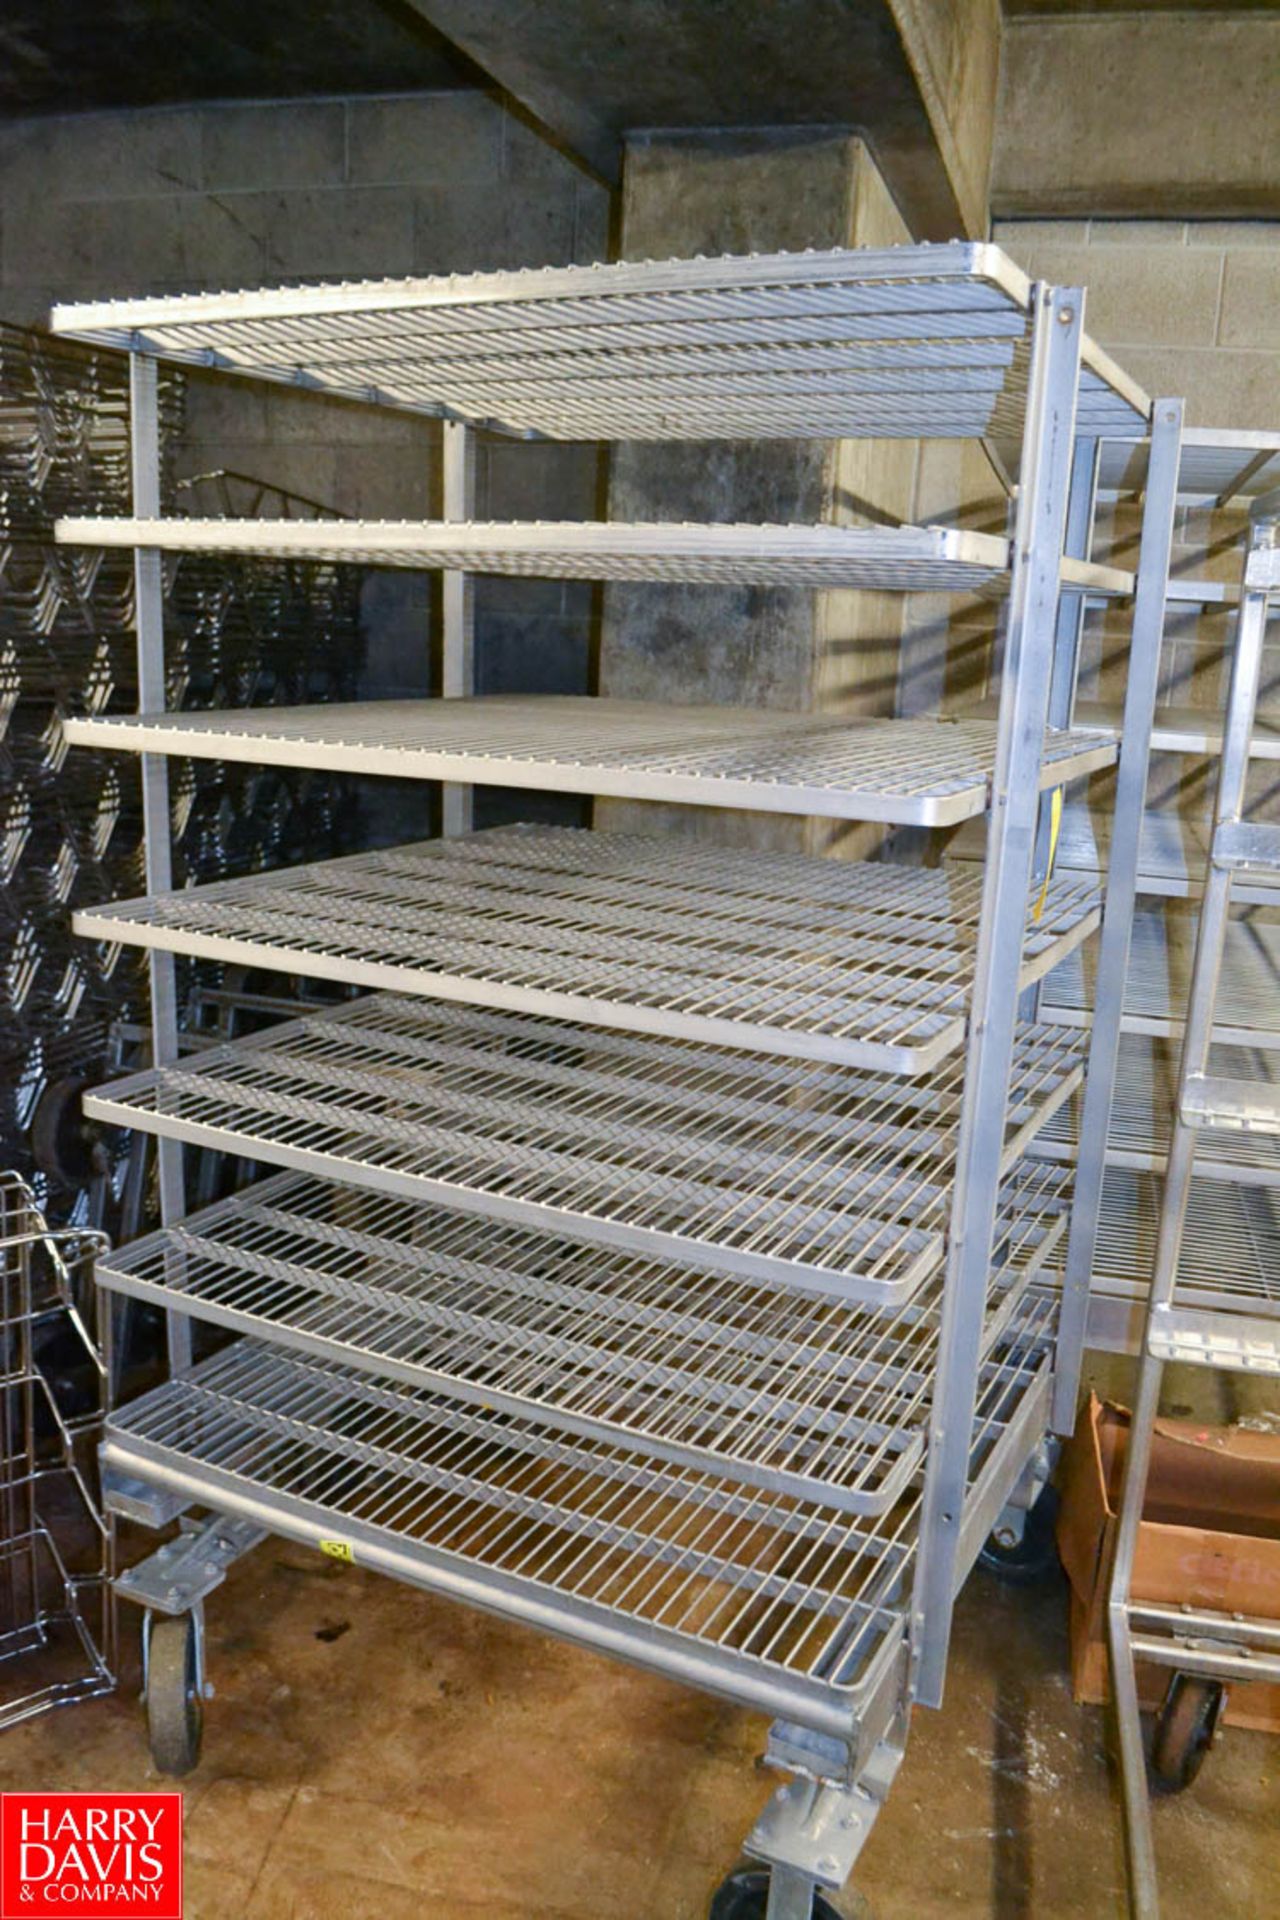 S/S Rack on Casters with S/S Wire Shelves - Image 2 of 4